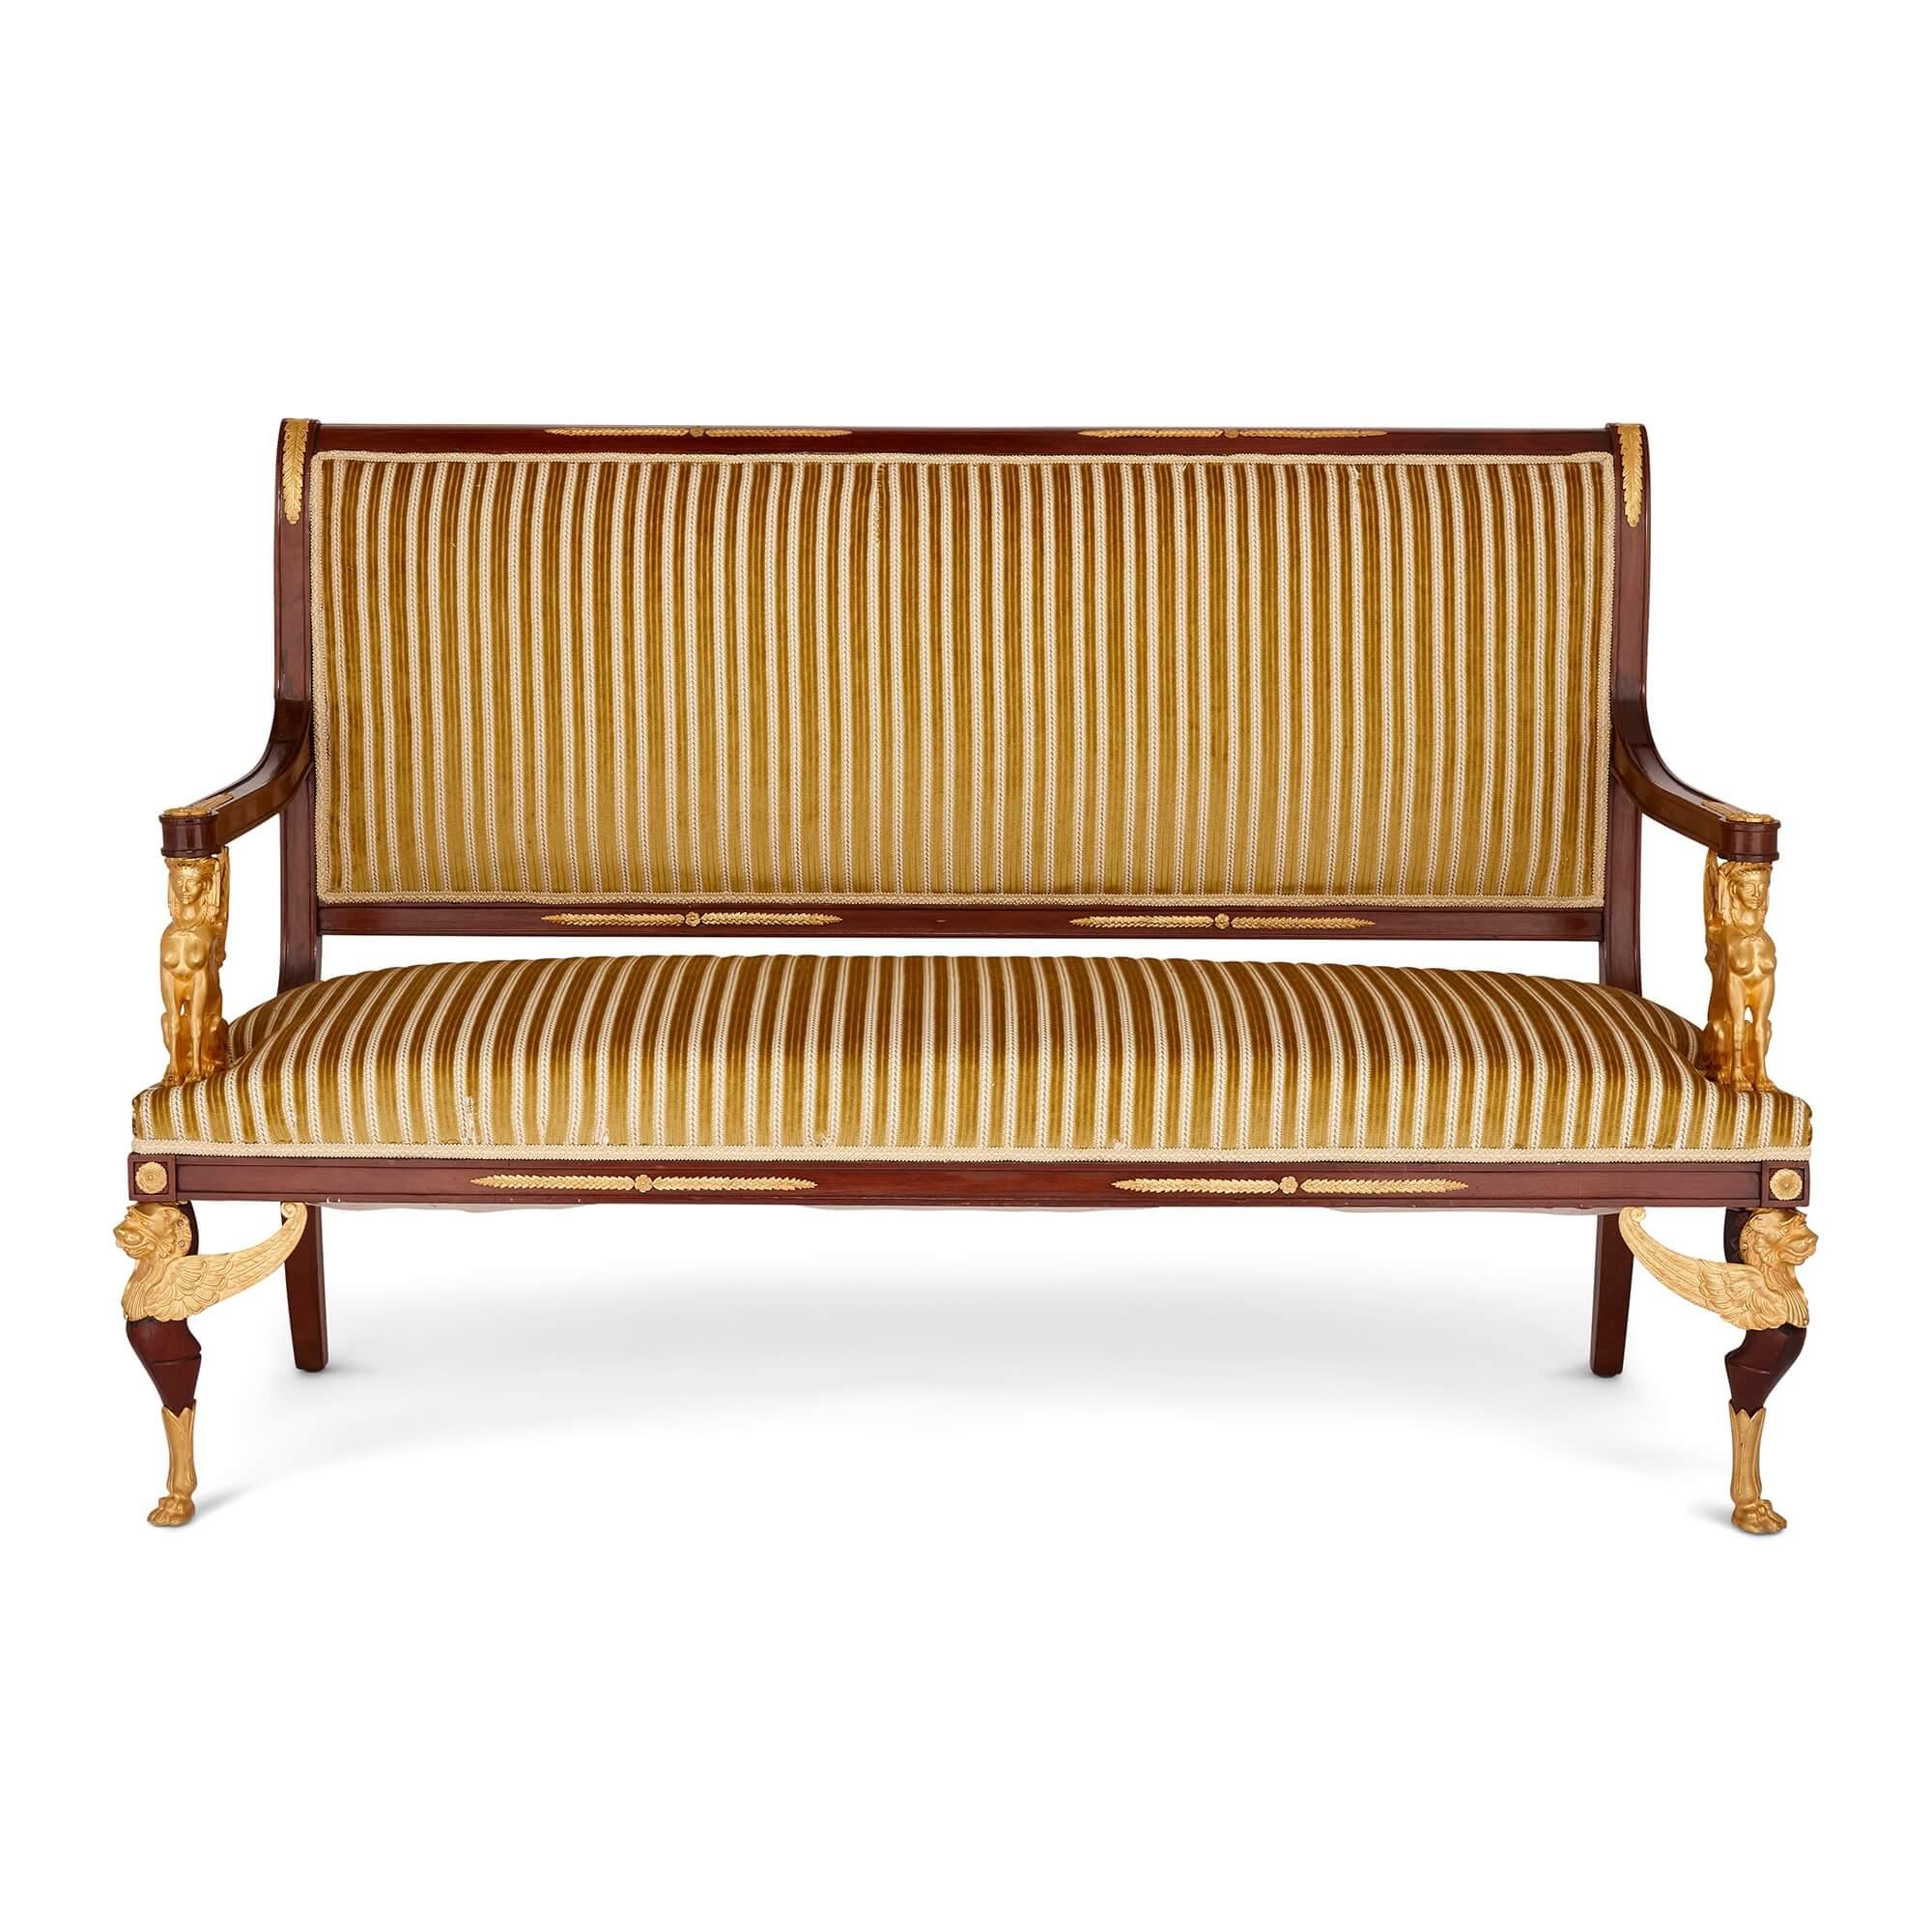 French Empire style gilt-bronze and mahogany five-piece salon suite
French, Late 19th Century 
Sofa: Height 107cm, width 162cm, depth 65cm
Armchair: Height 101cm, width 68cm, depth 63cm 
Chair: Height 96cm, width 55cm, depth 57cm

This superb